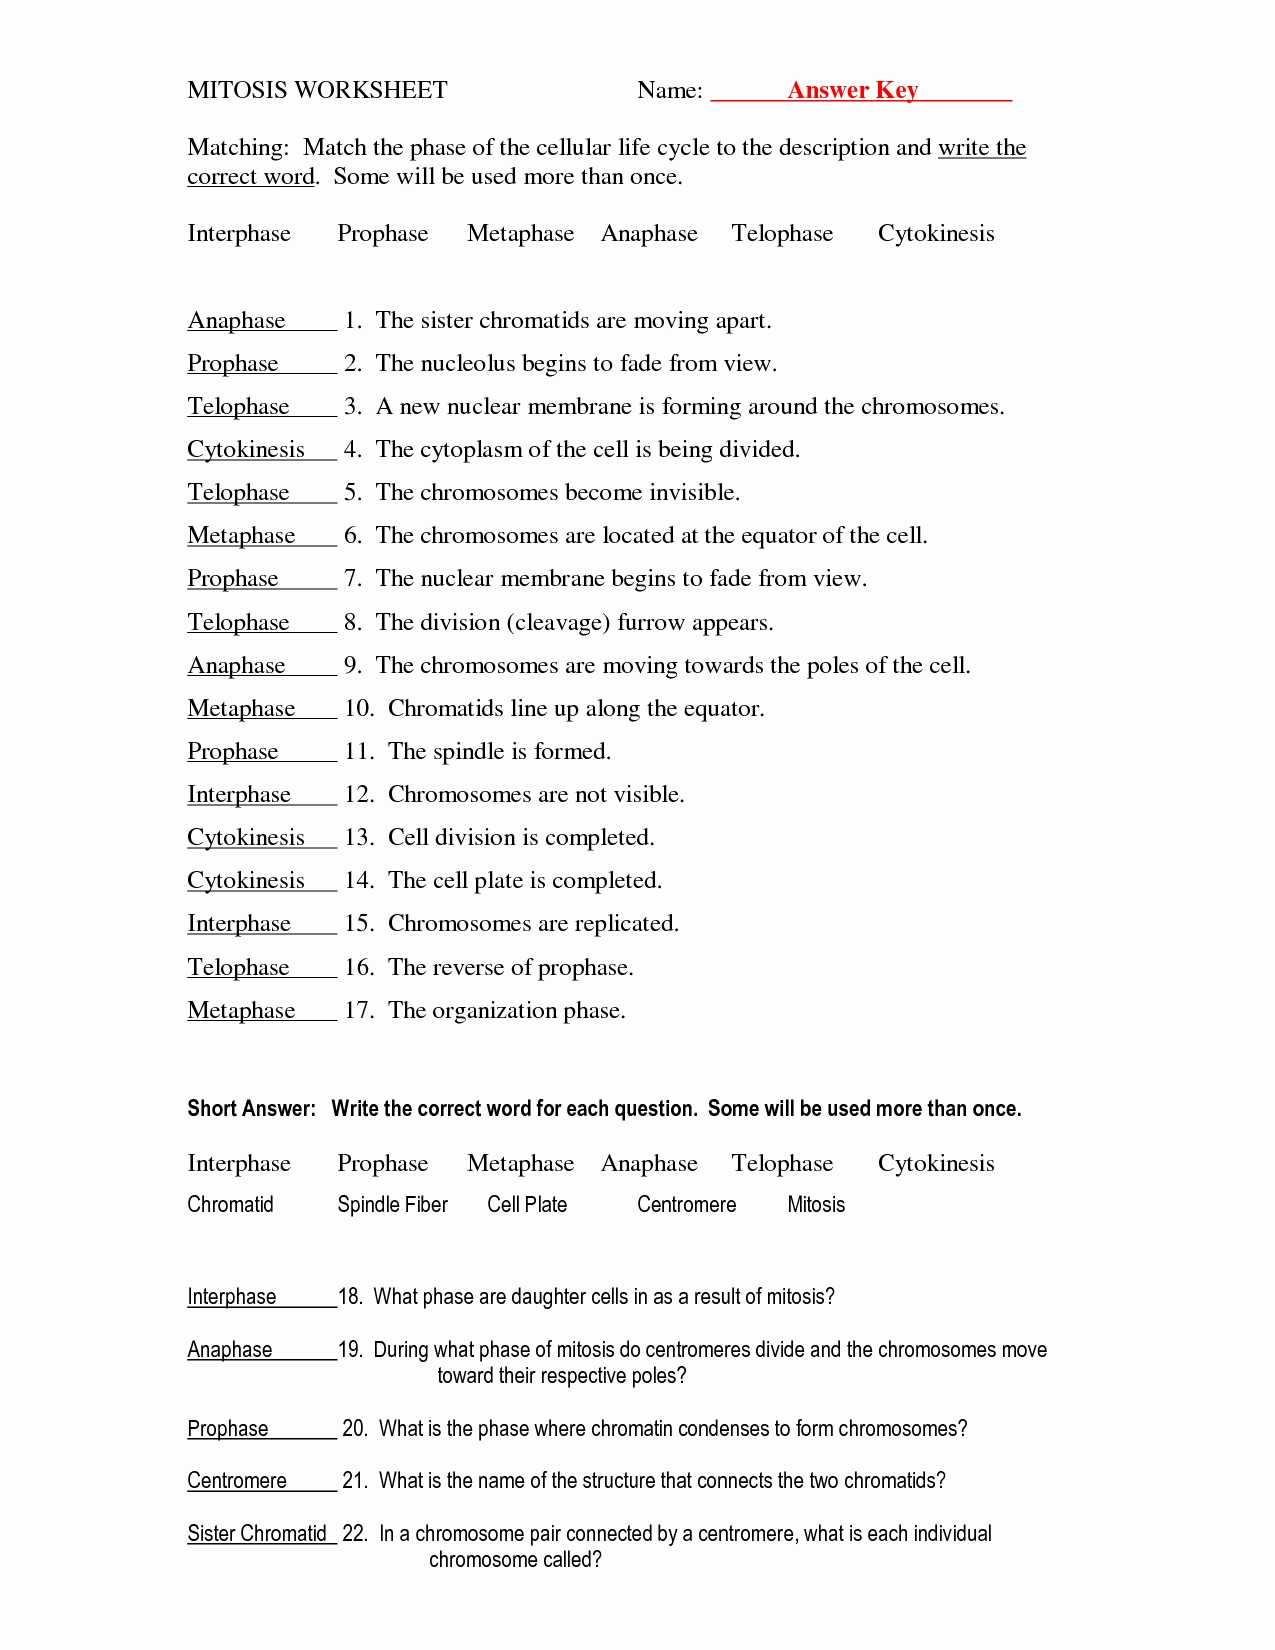 Water Carbon and Nitrogen Cycle Worksheet Answer Key Also Nitrogen Cycle Worksheet Answers Image Collections Worksheet Math